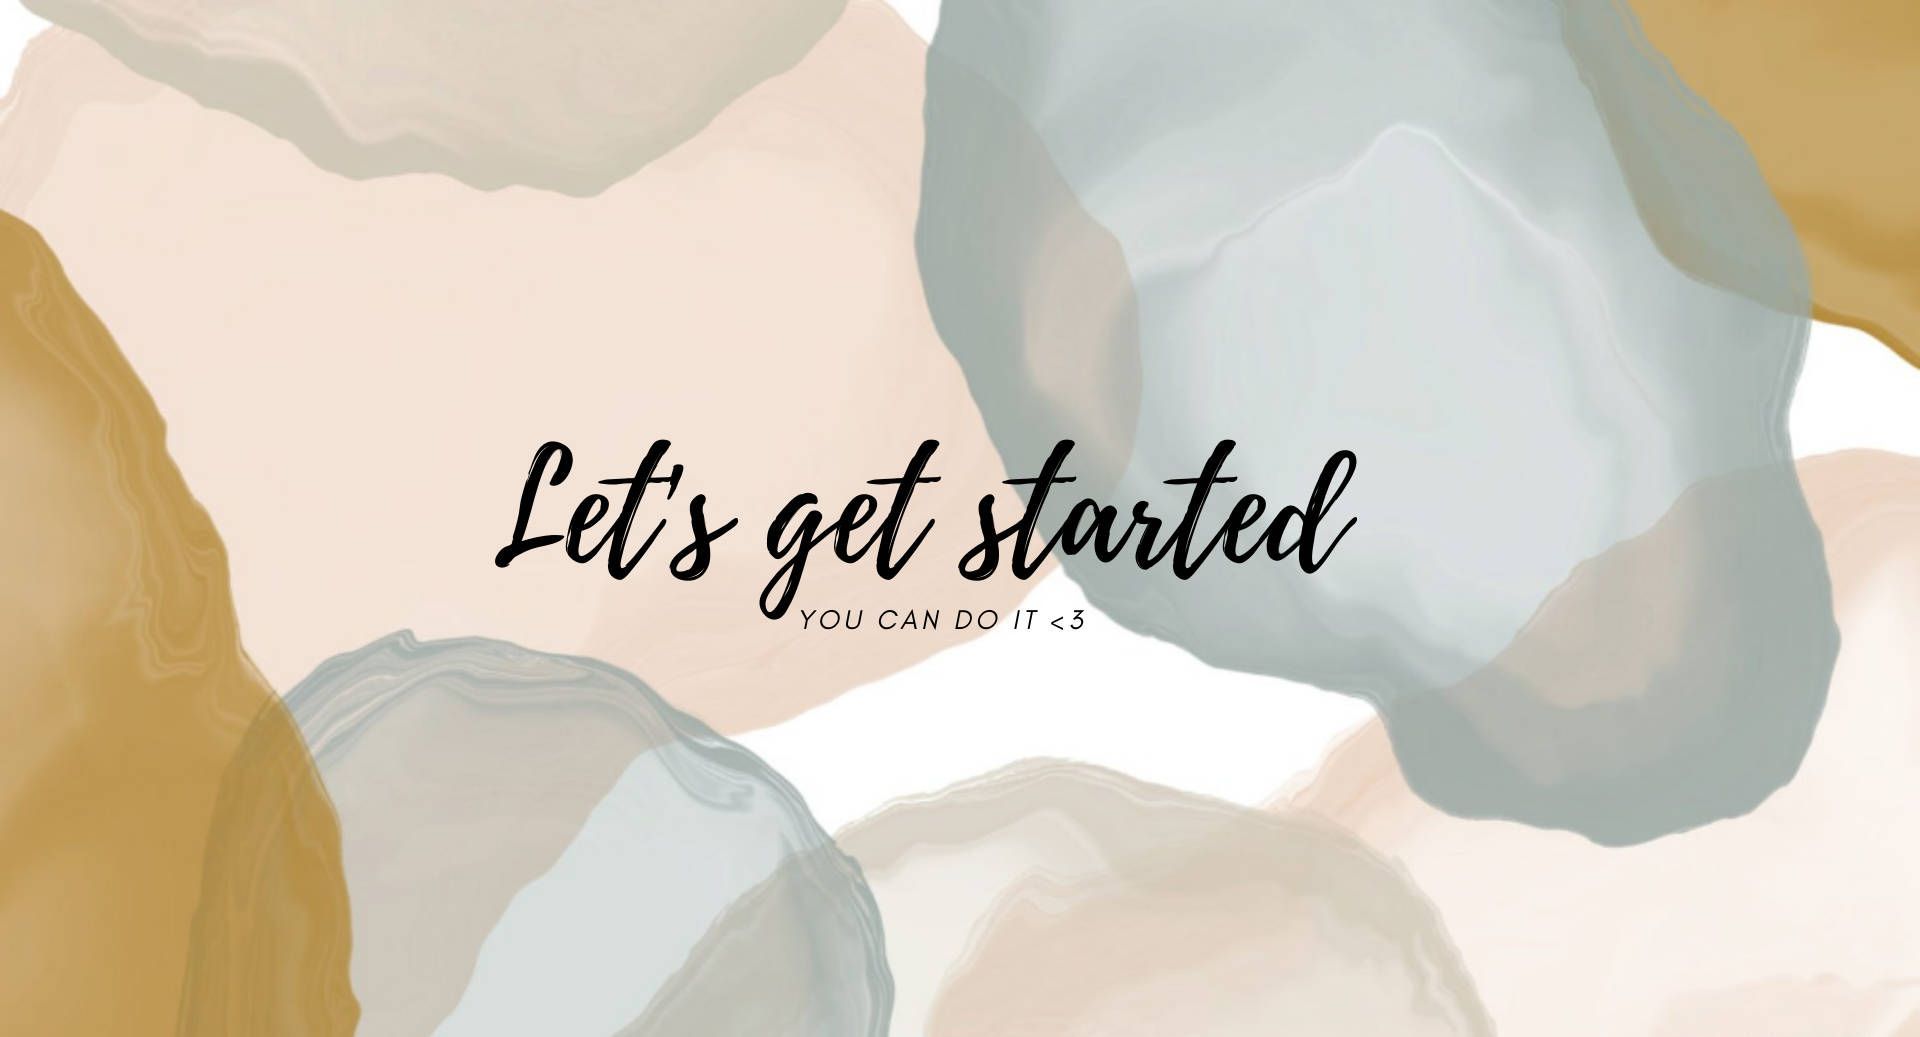 Let's get started. You can do it. - Inspirational